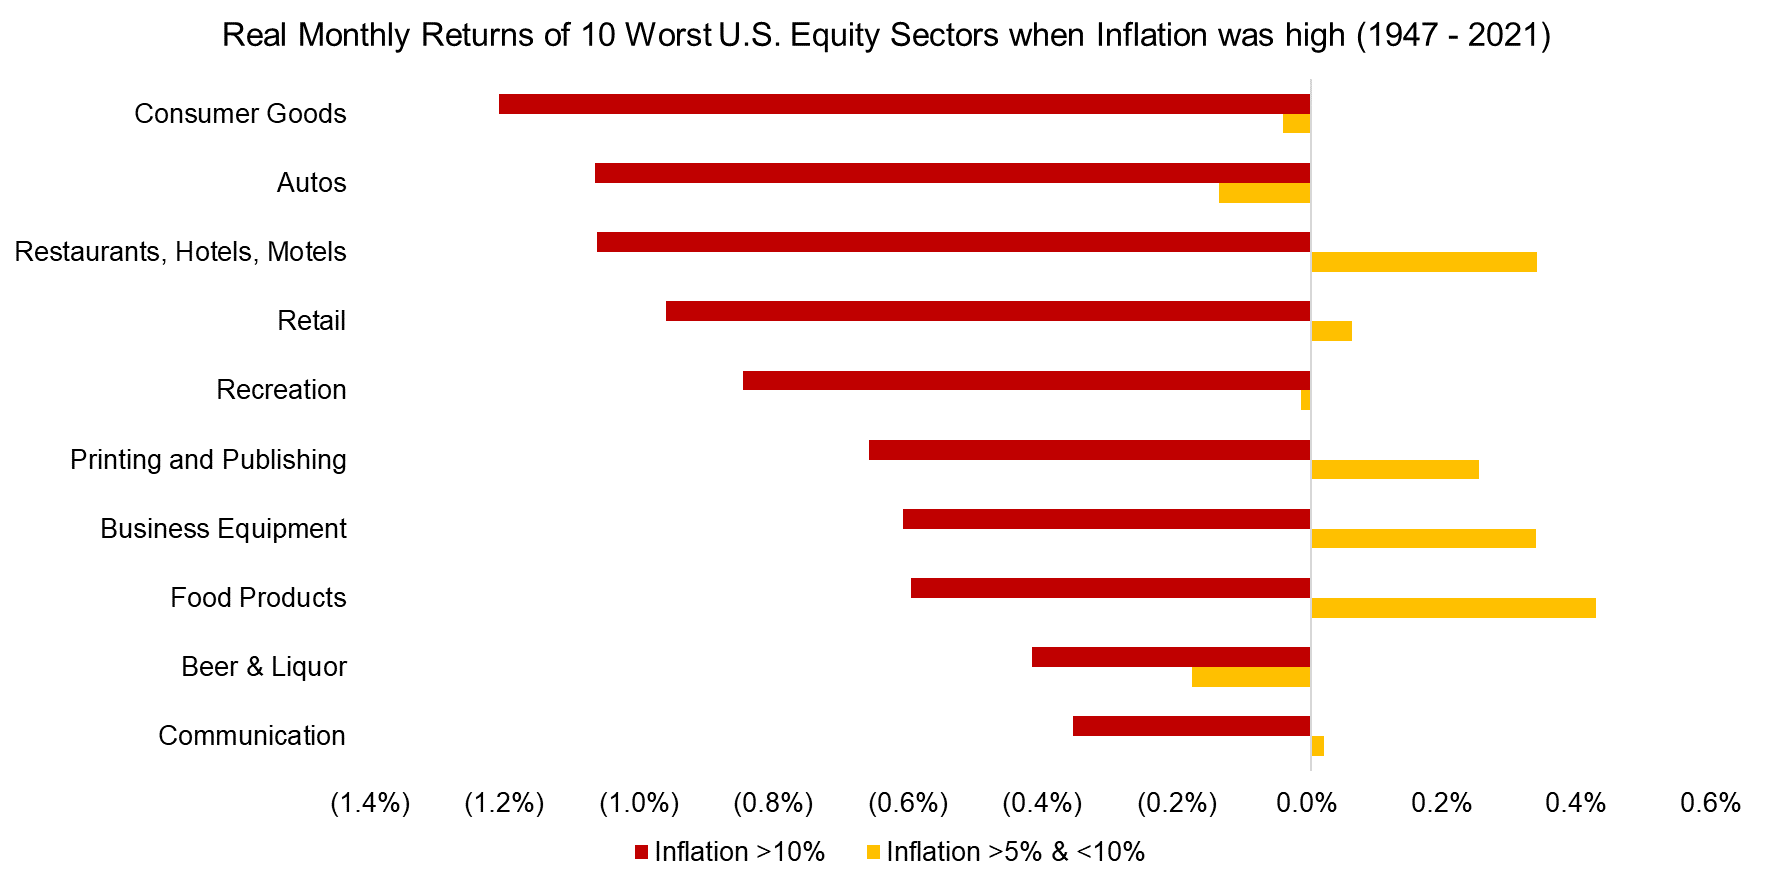 Real Monthly Returns of 10 Worst U.S. Equity Sectors when Inflation was high (1947 - 2021